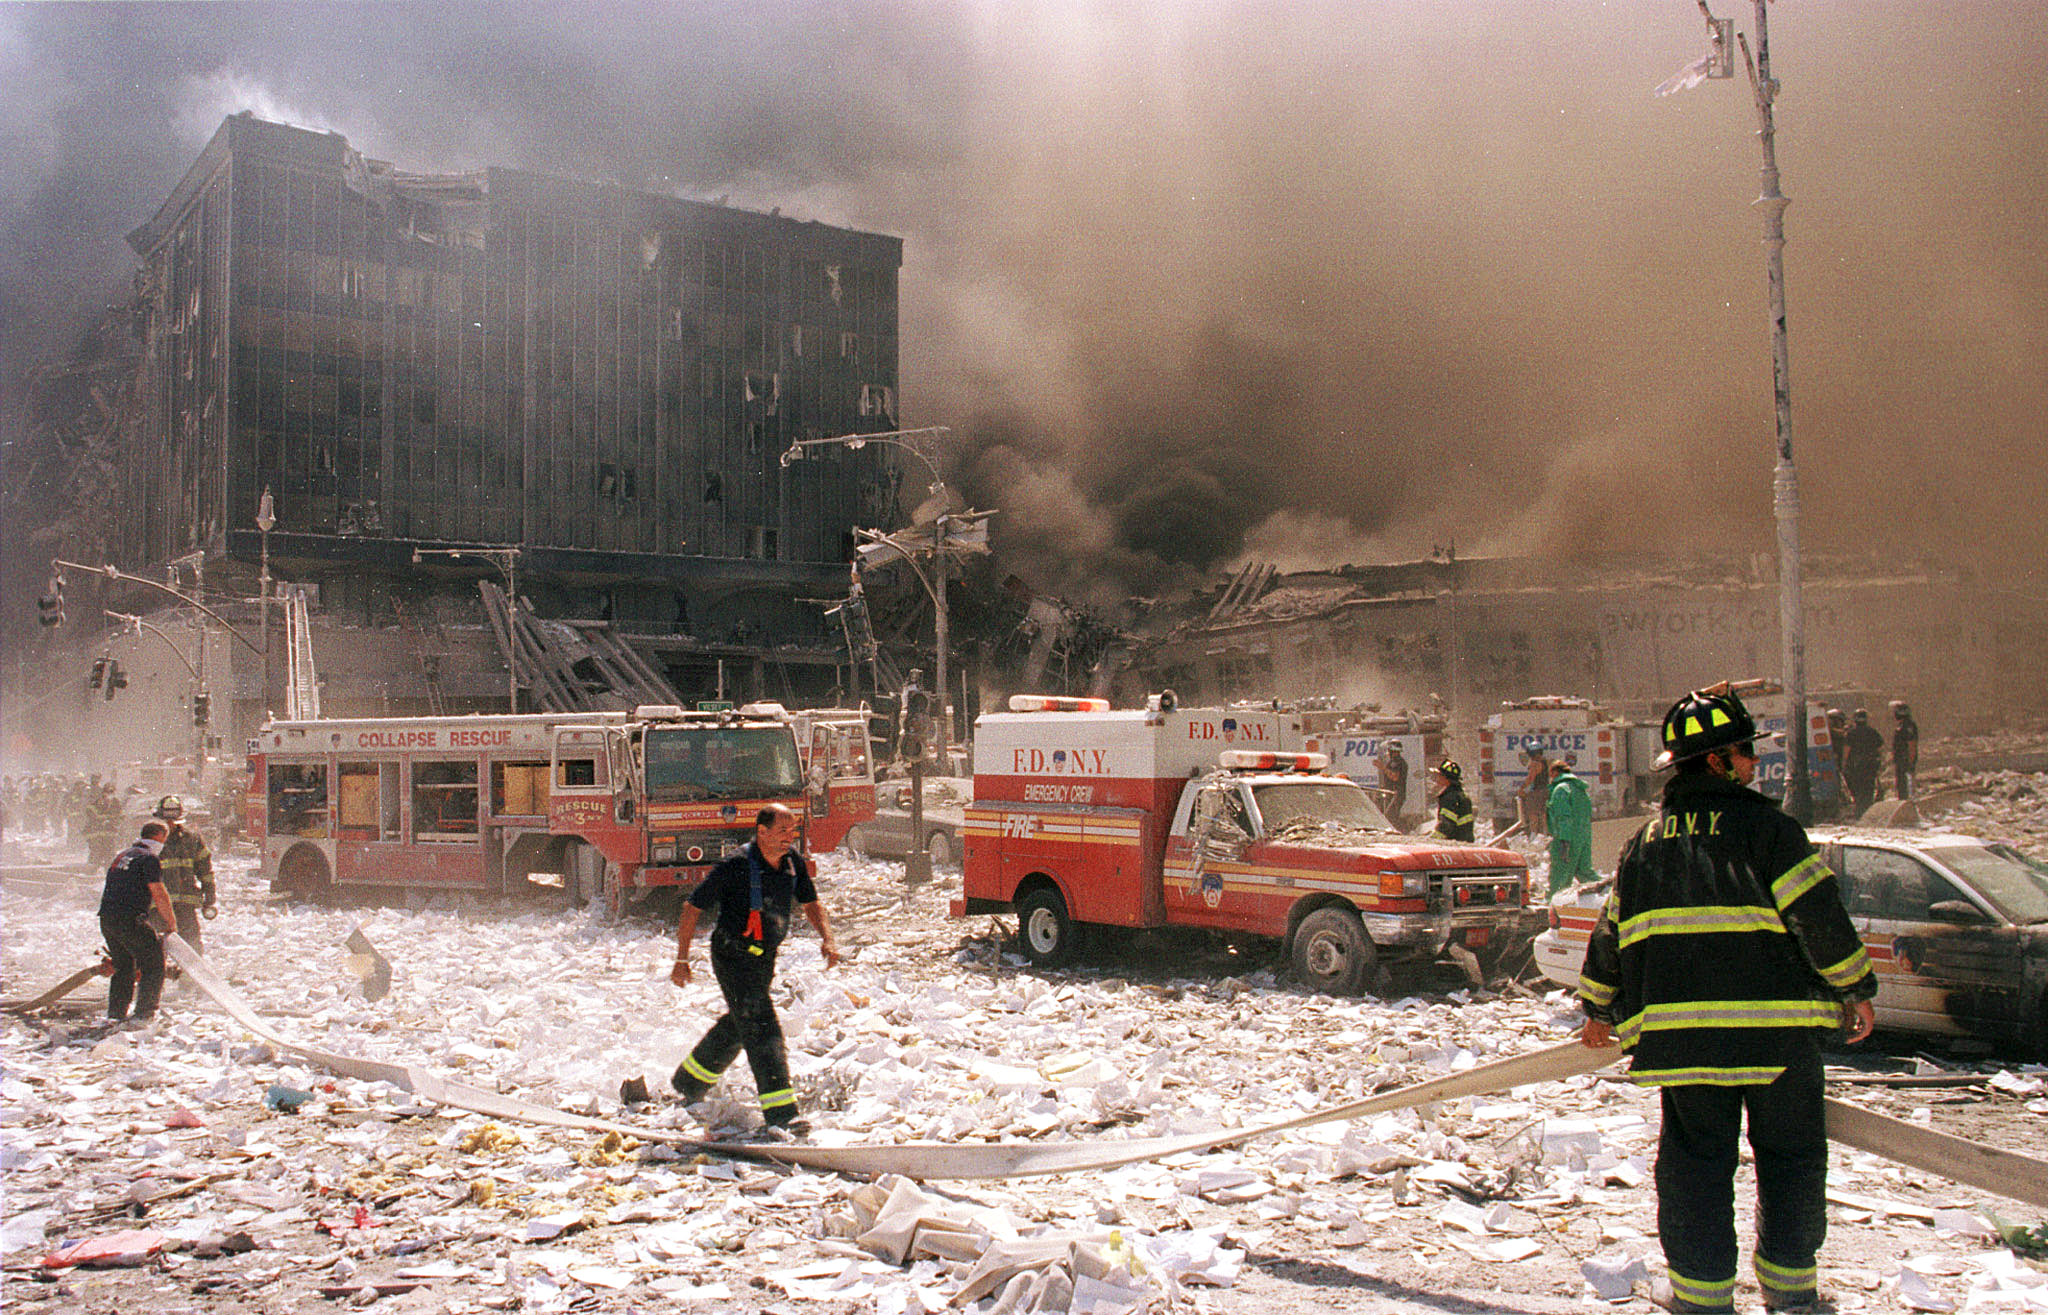 These images show horror and heroism in New York on 9/11, 19 years ago